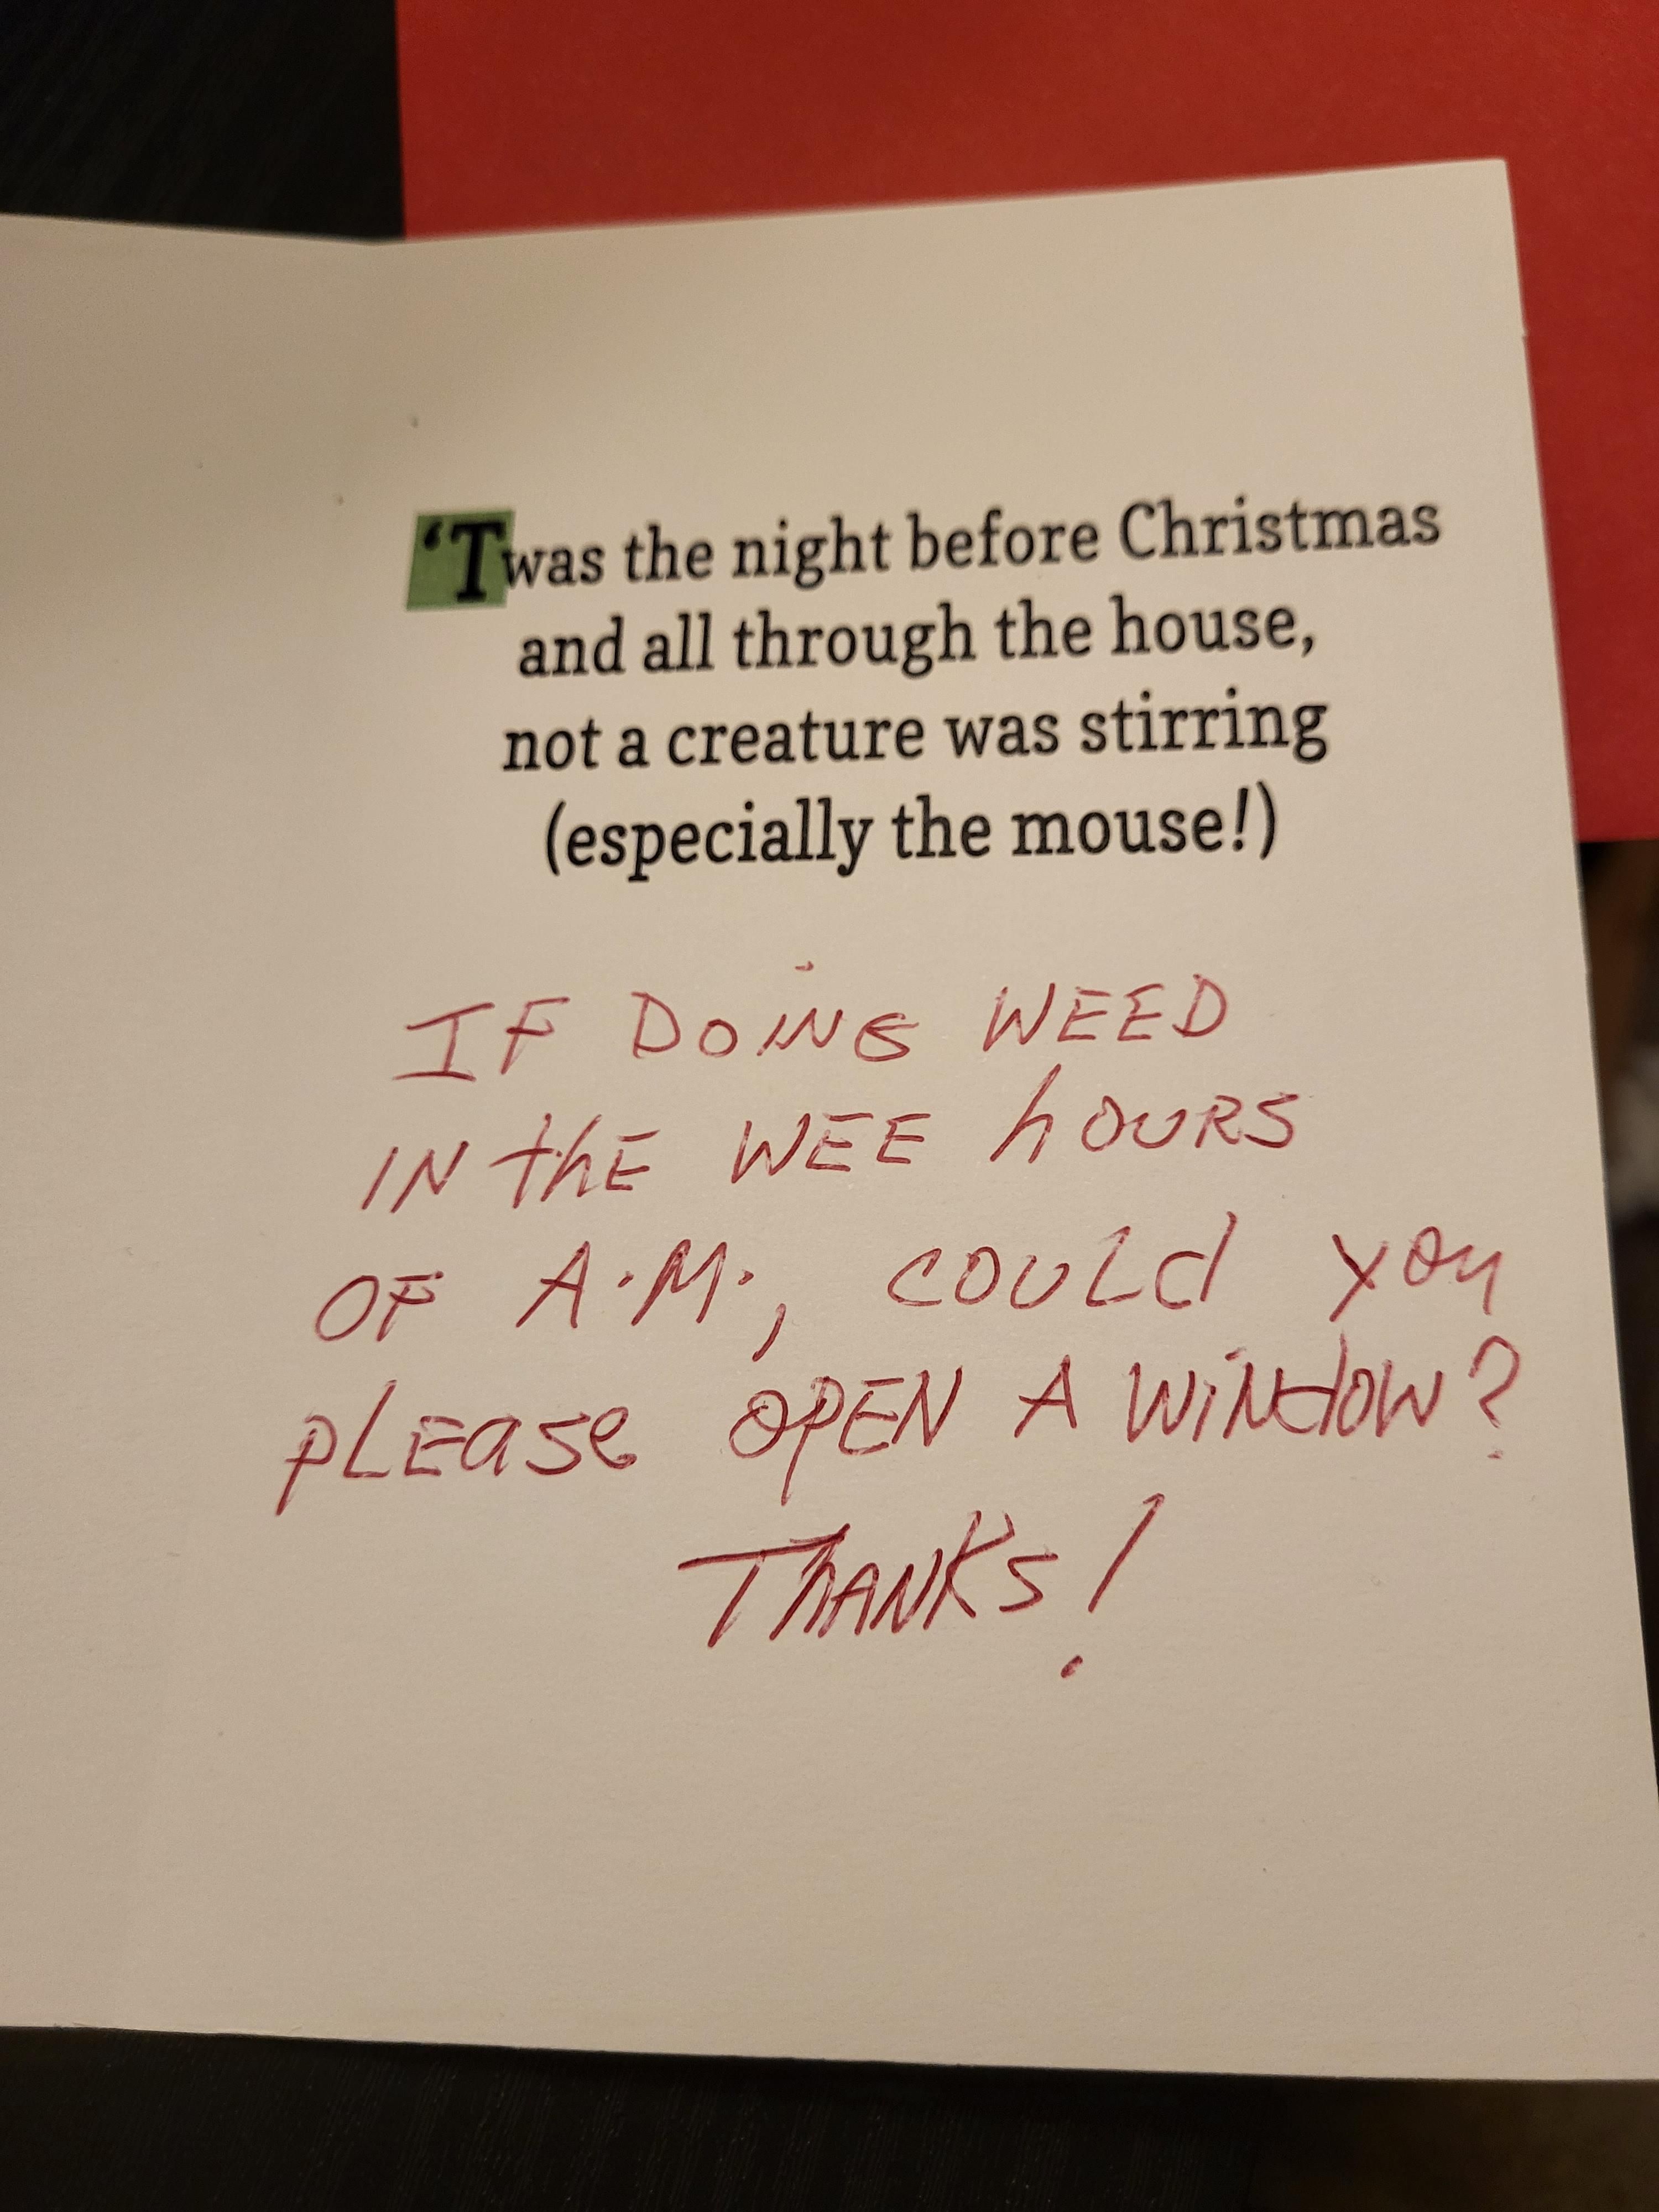 Got a thoughtful Christmas card from one of my neighbors